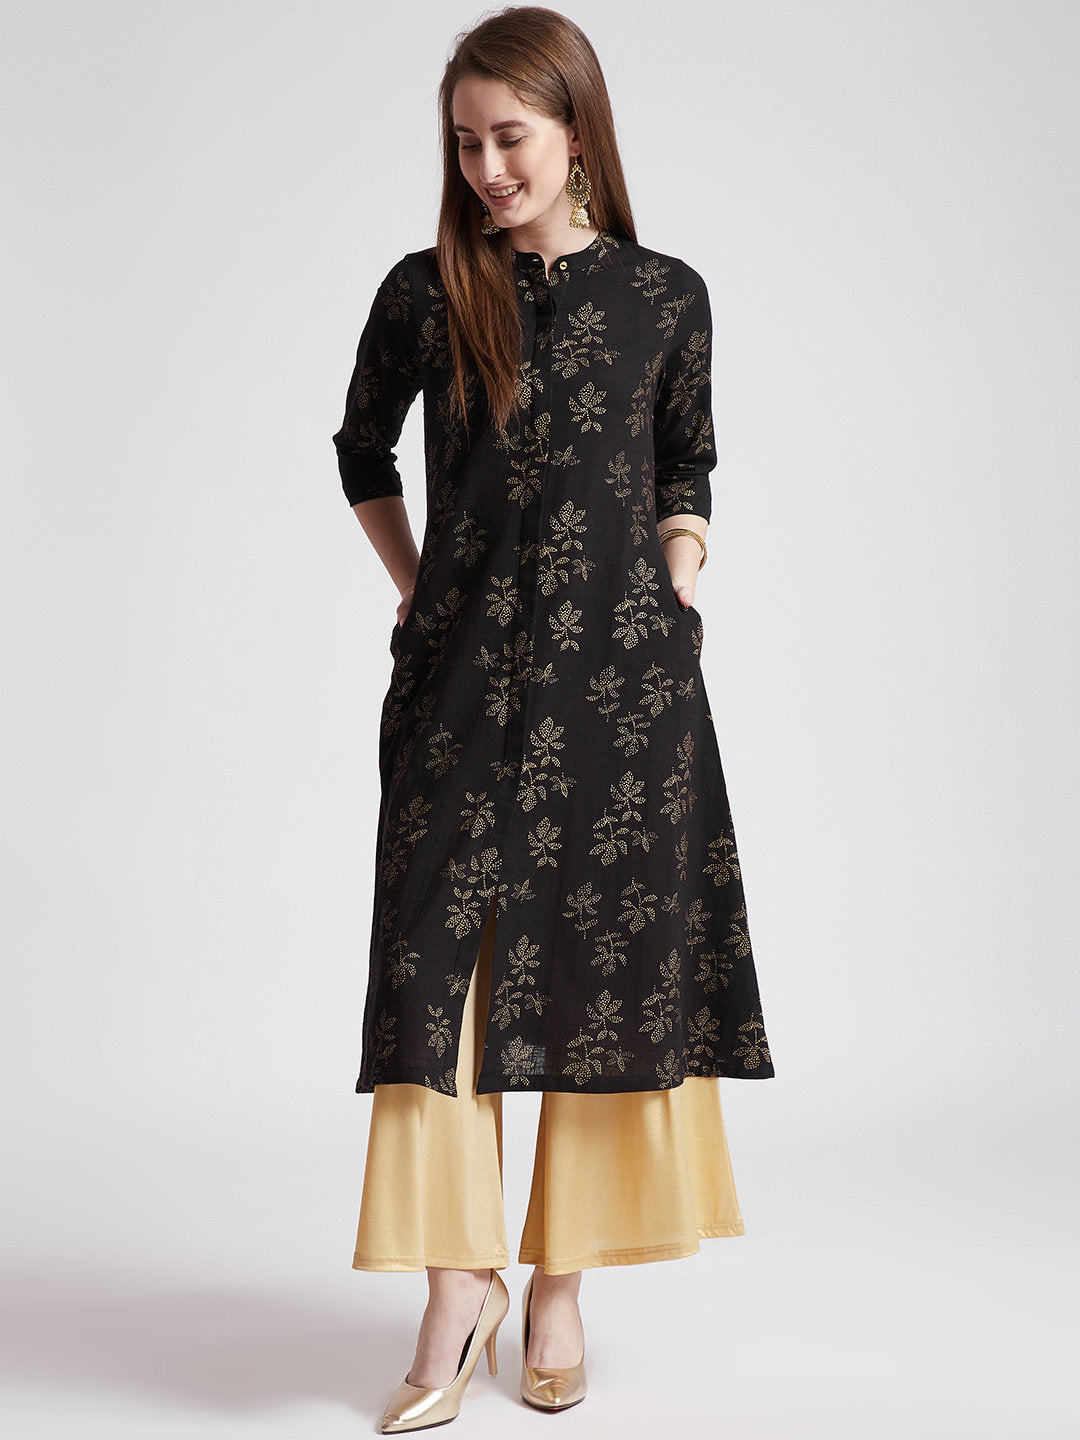 Indian ethnic gold hand block printed long kurta with front slit in black colour with pockets and button detailing on front